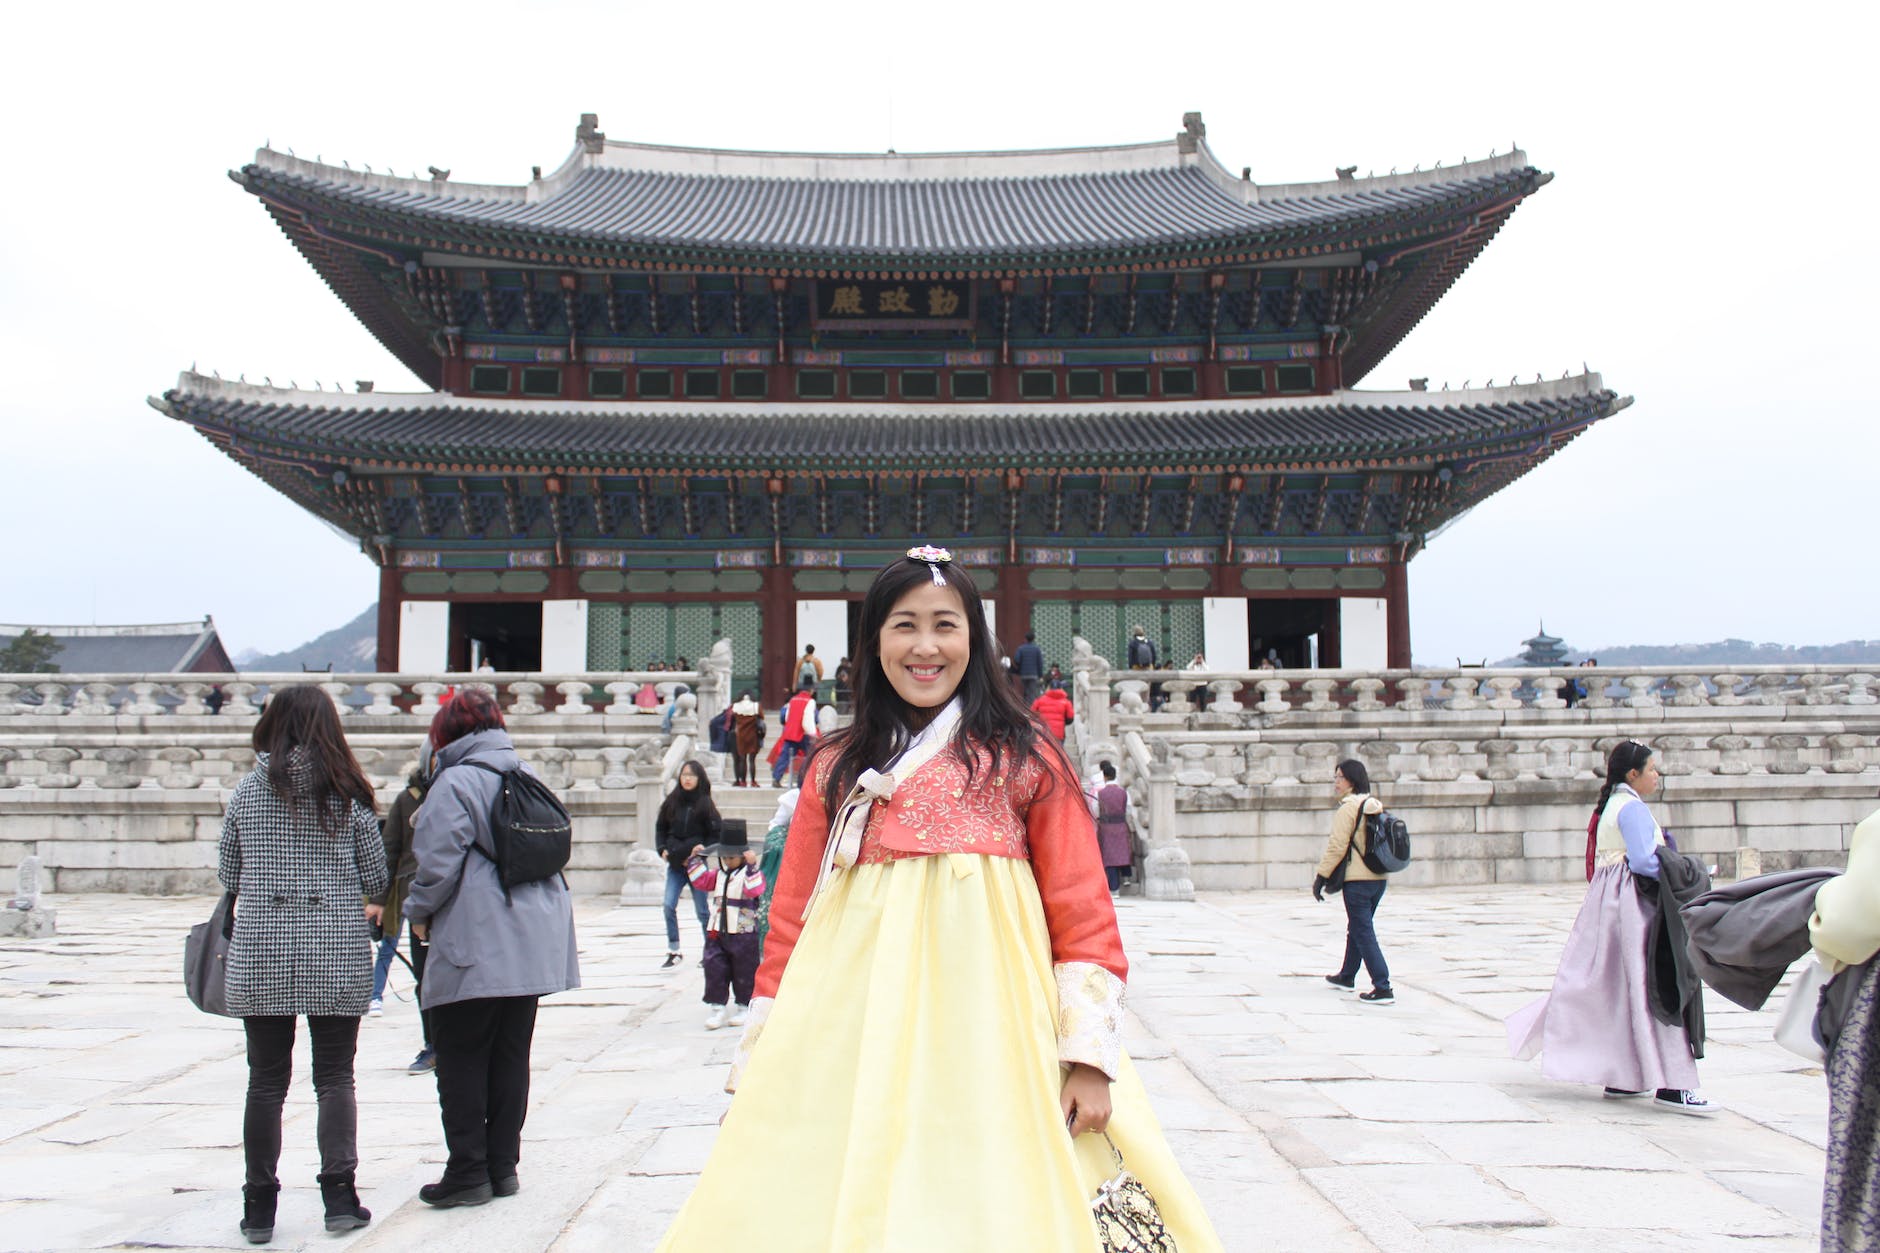 cheerful woman standing against pagoda in cloudy weather